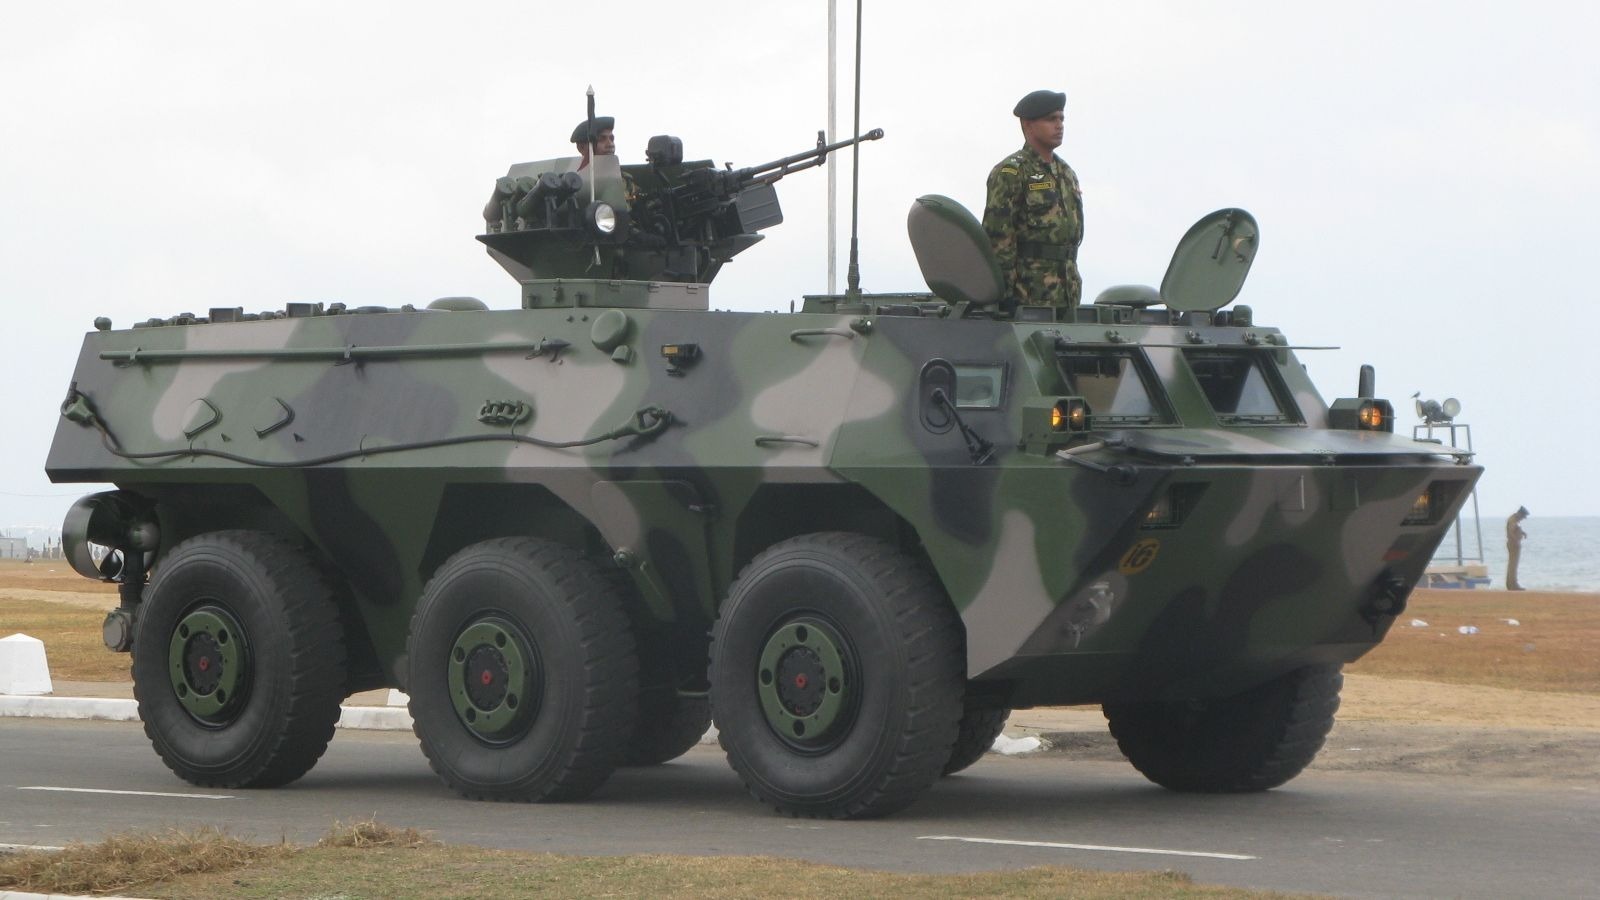 ZSL90 Vs. ZSL92: What's The Difference Between These Armored Personnel Carriers?